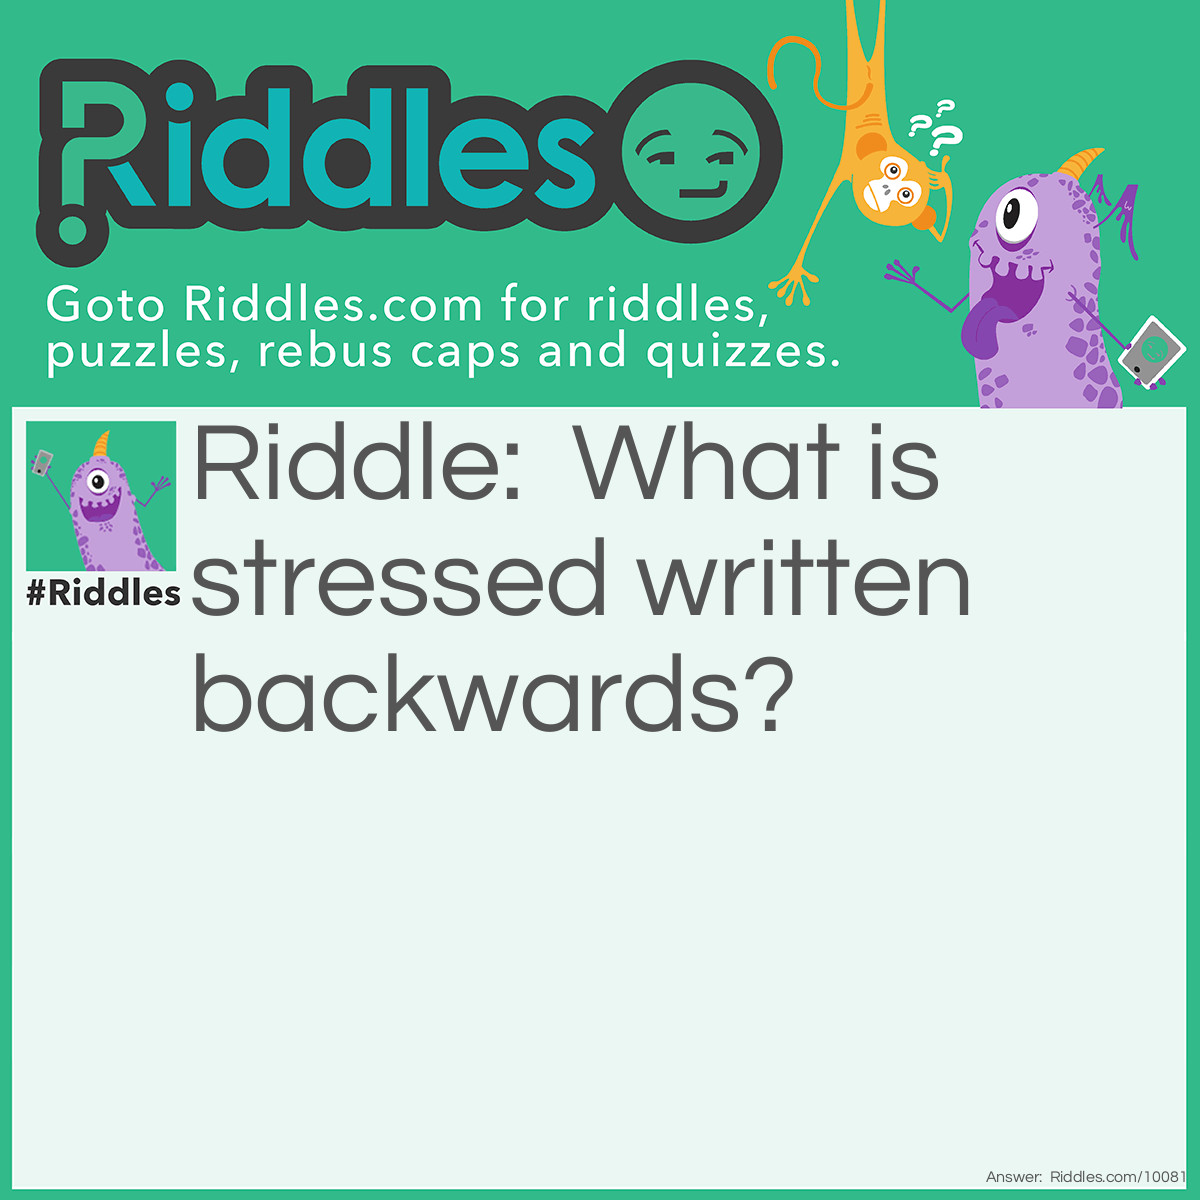 Riddle: What is stressed written backwards? Answer: Desserts.